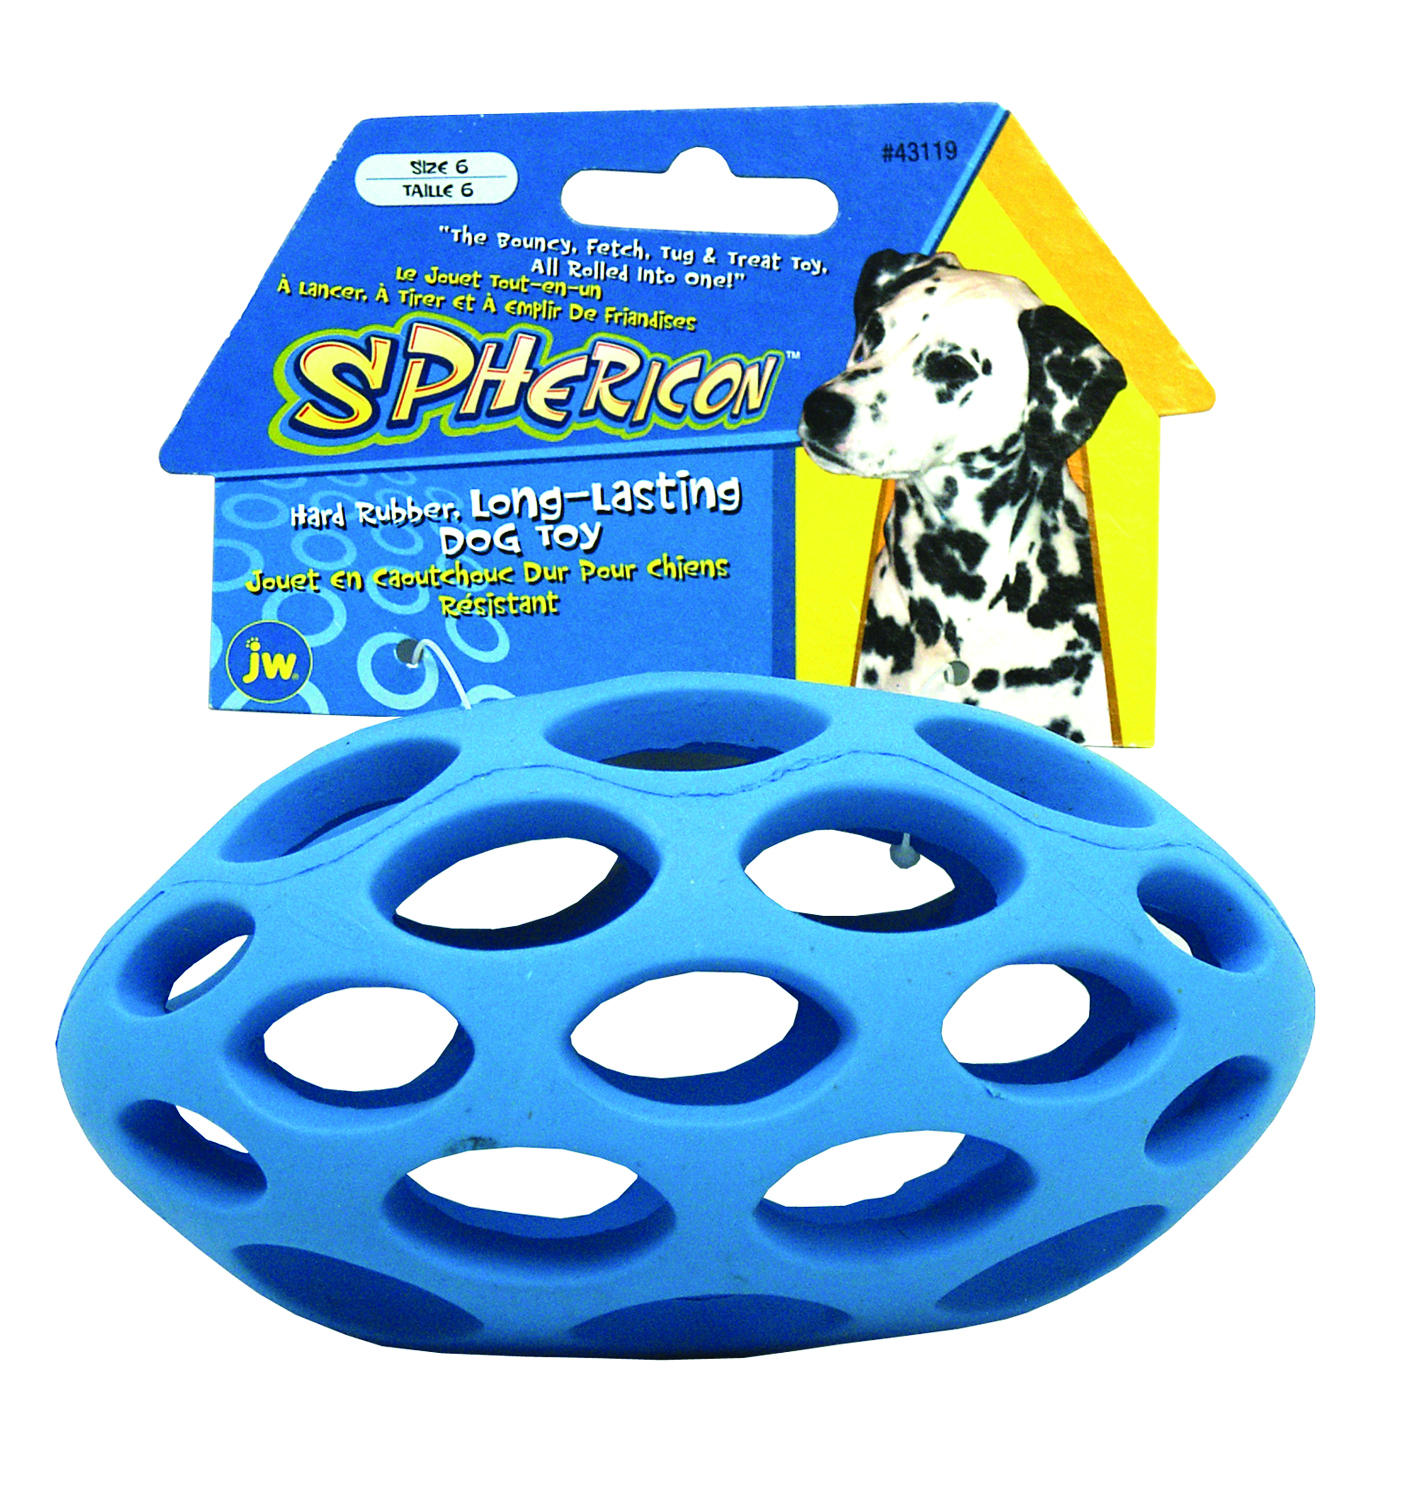 The sphericon 6 in colorful dog toy